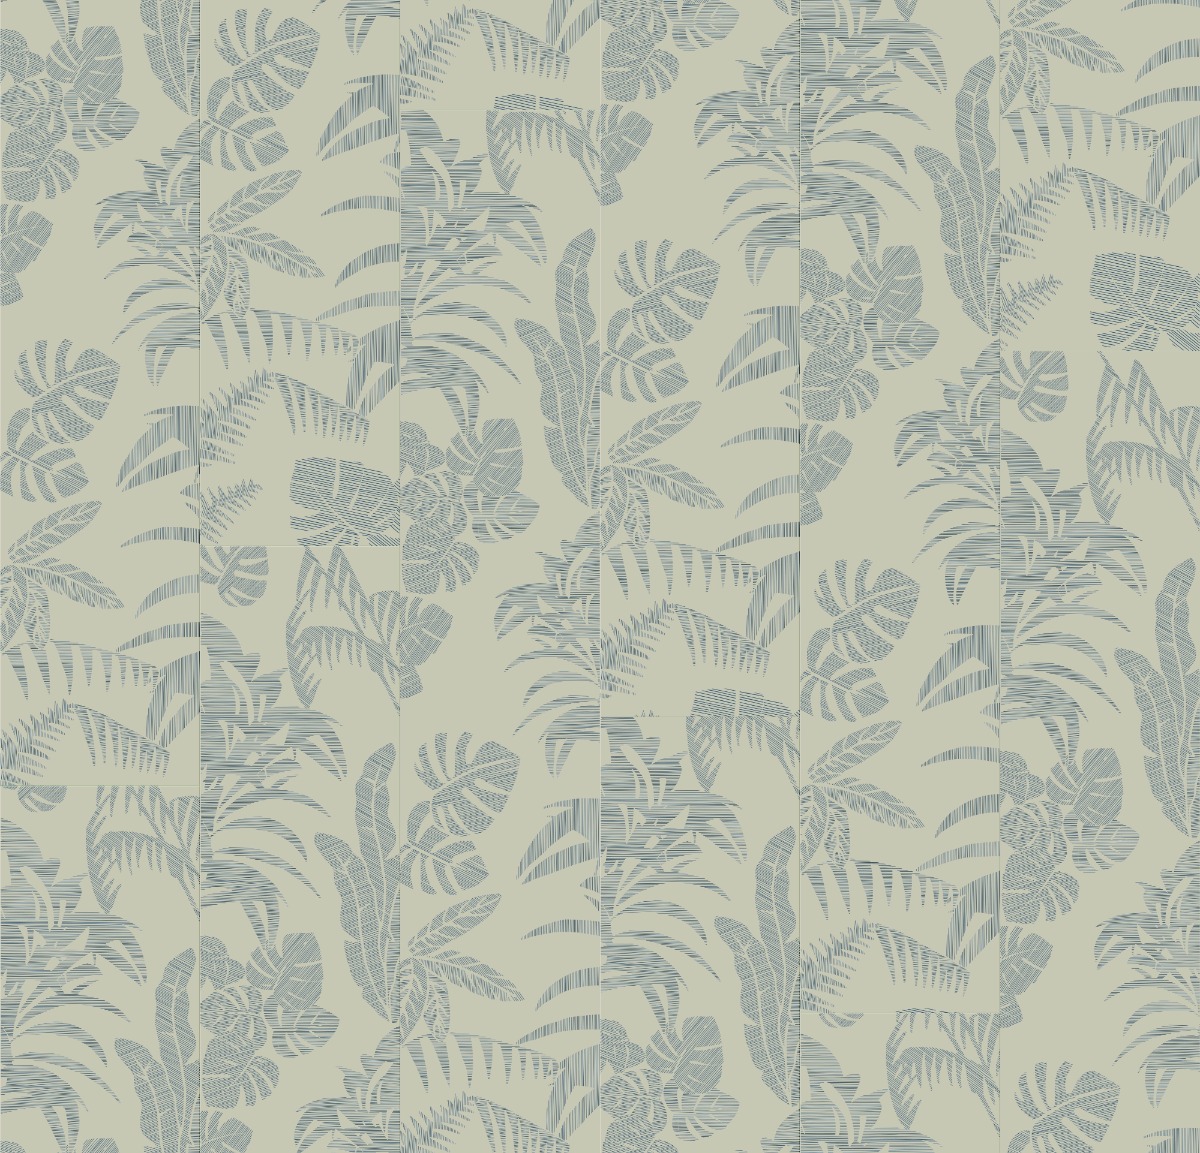 A seamless wallpaper texture with flourish wallpaper in moss units arranged in a  pattern